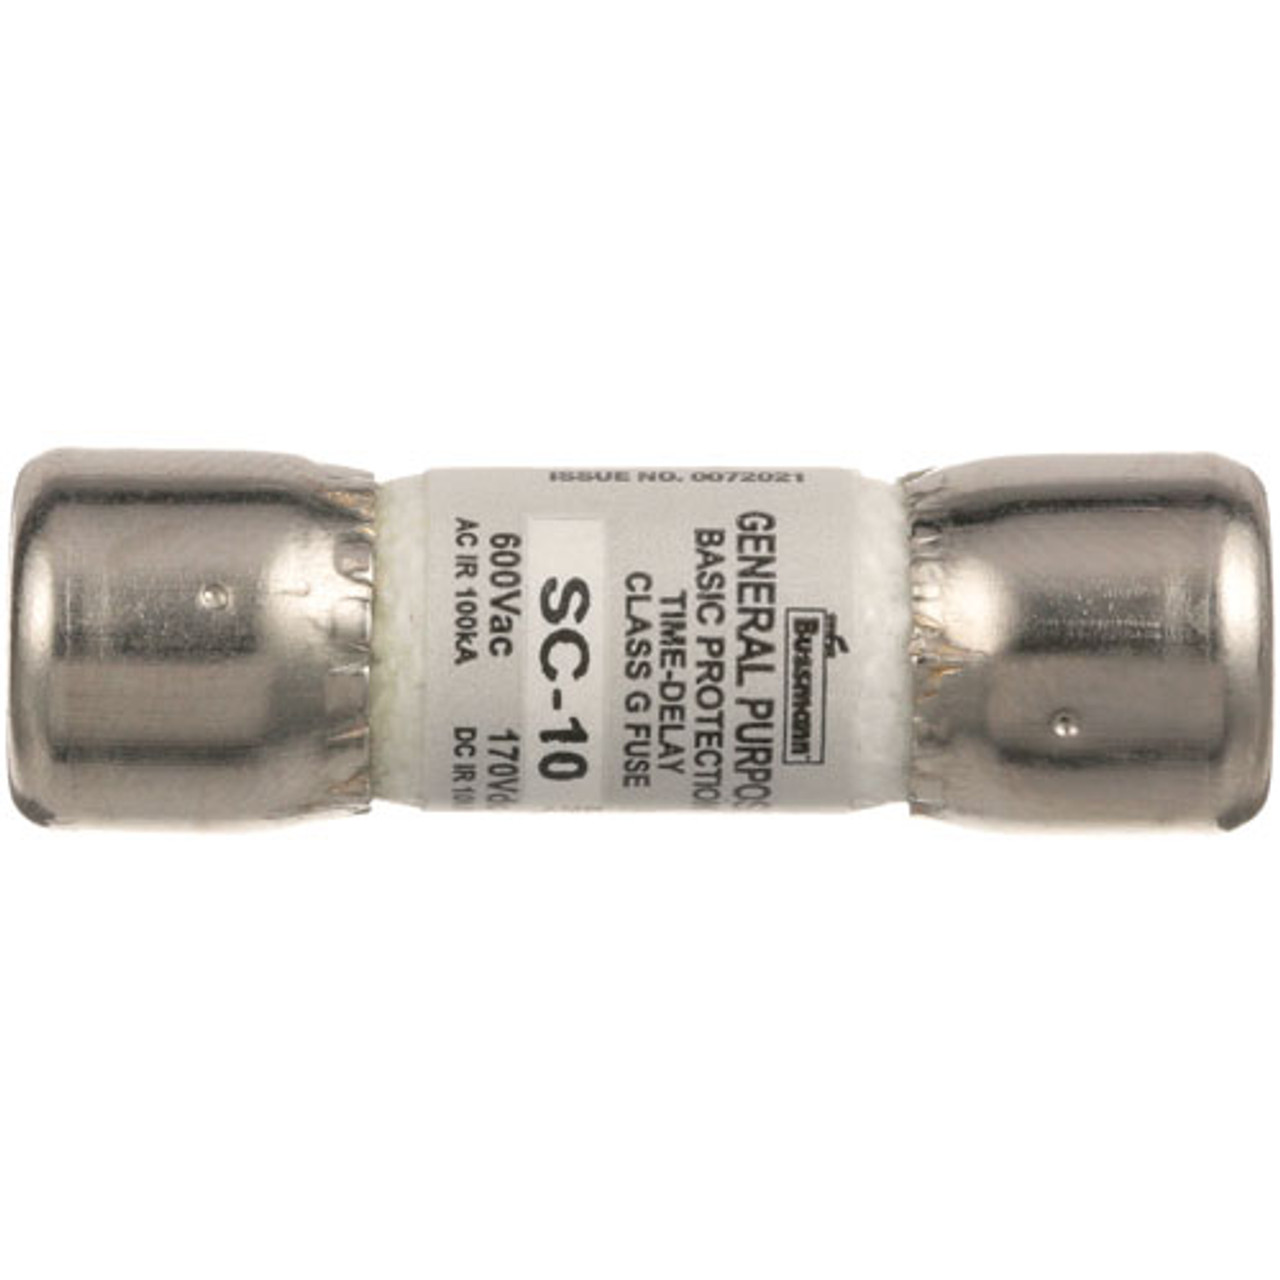 Fuse - Replacement Part For Star Mfg WS-54871